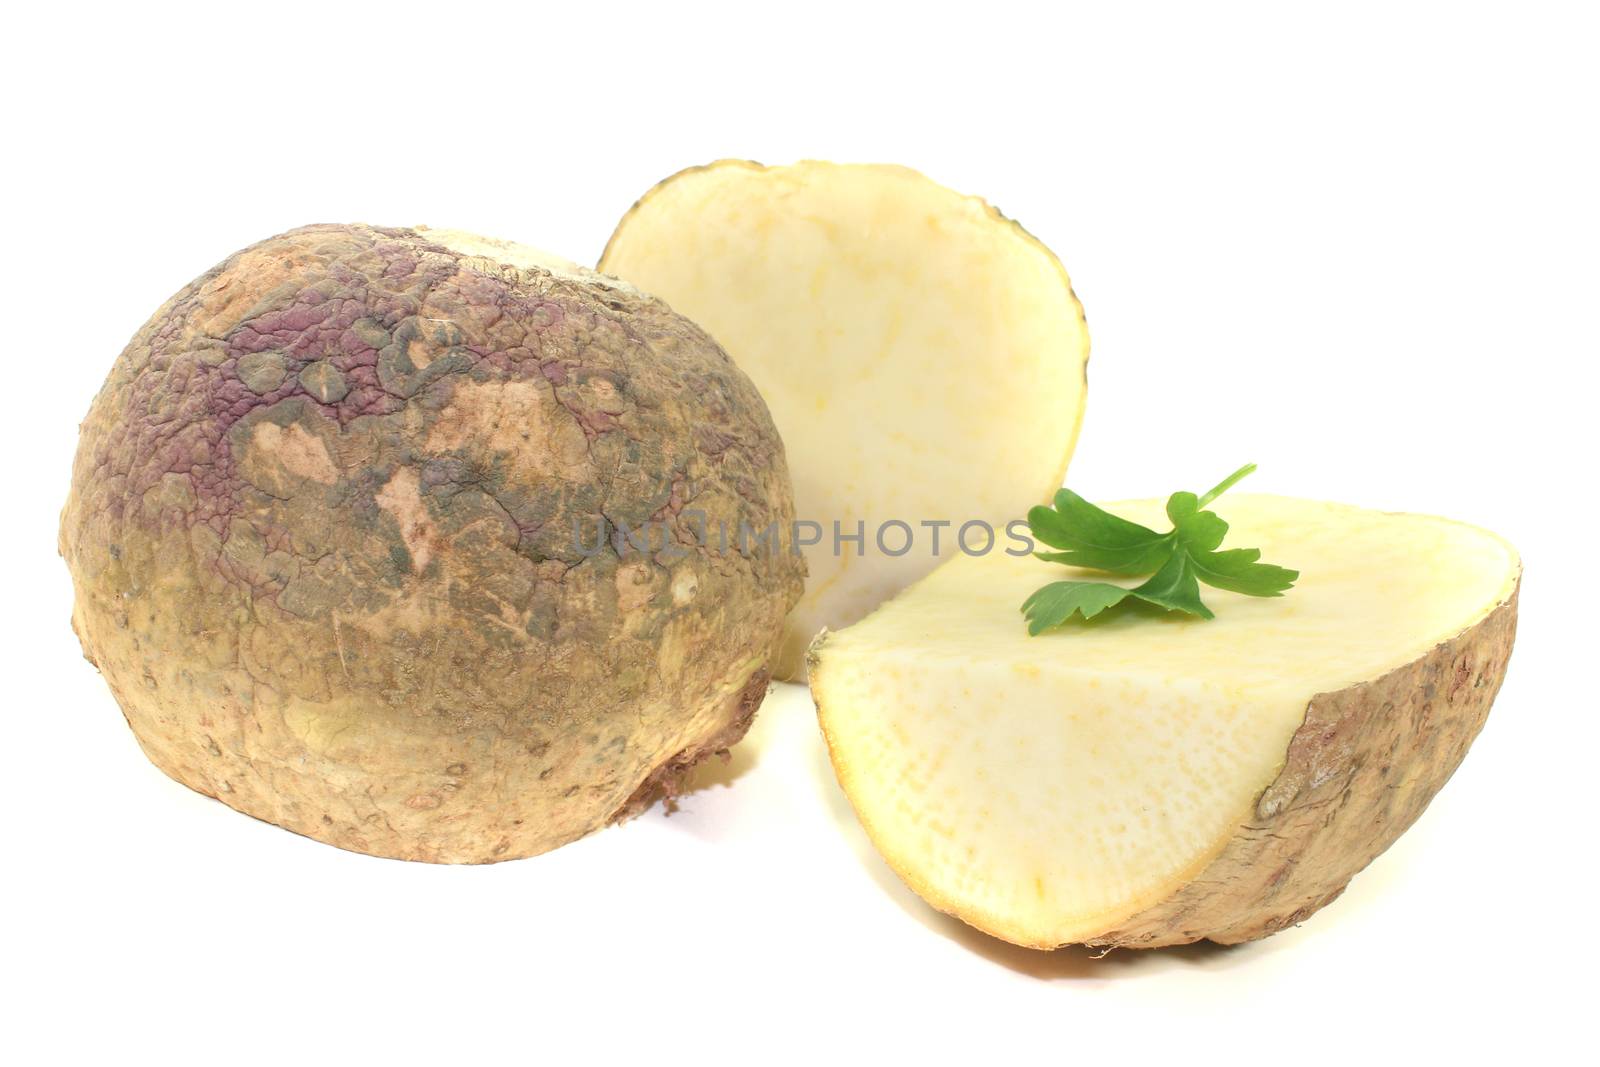 Turnip with parsley by discovery